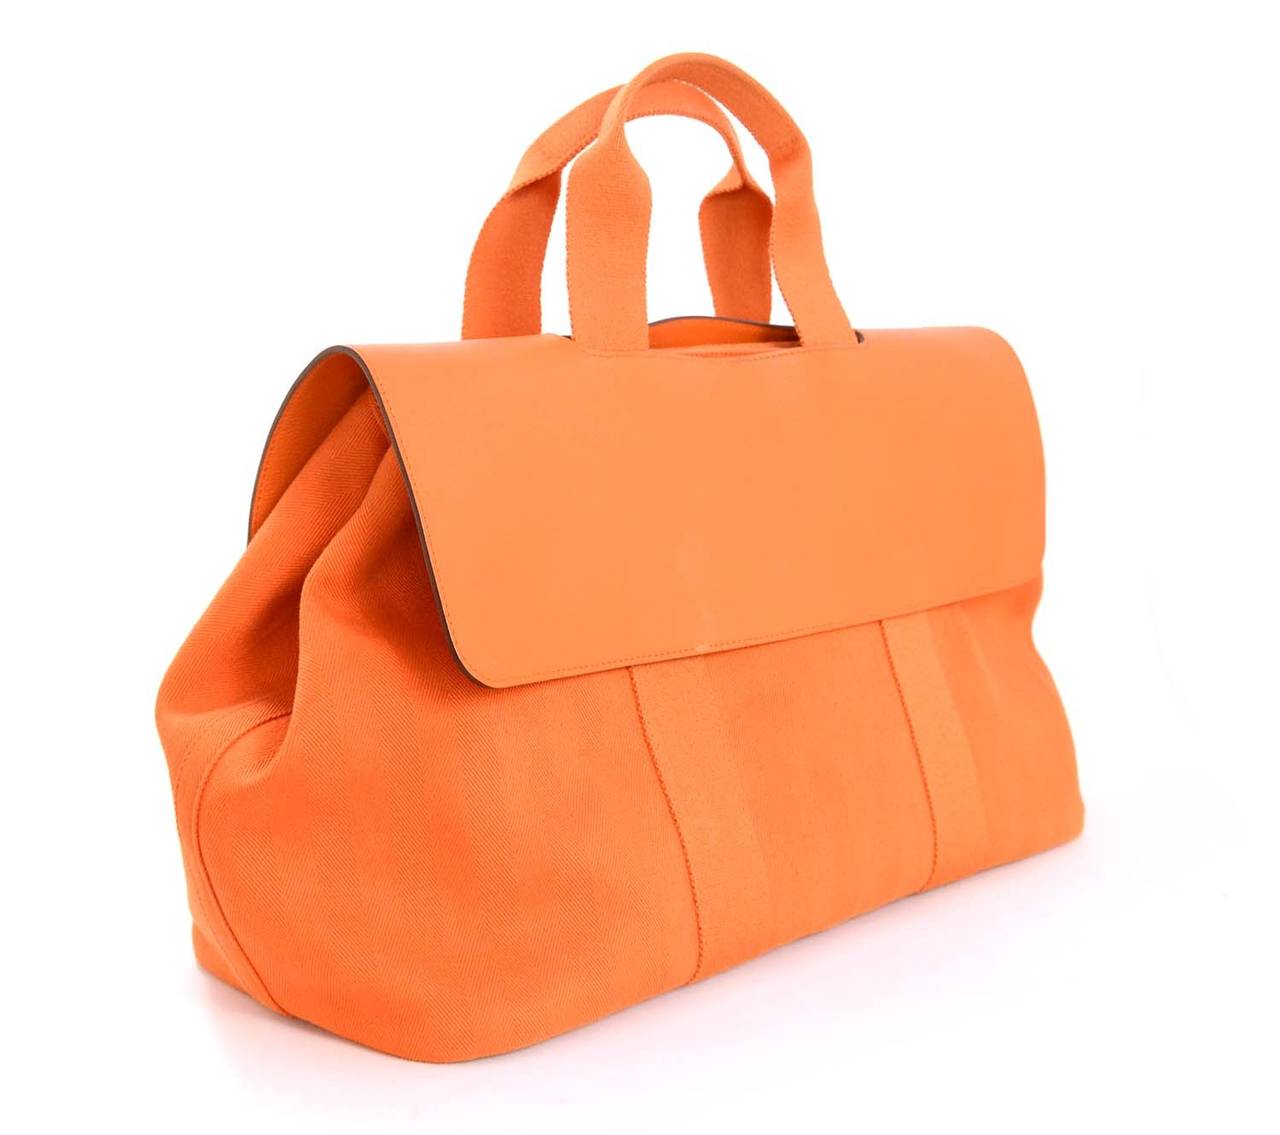 Hermes Orange Canvas Valparaiso GM Bag W/Leather Flap

    Age: c. 2011
    Made in France
    Materials: canvas, leather
    Roomy interior features a slip pocket. Snap button at sides to widen bag.
    Snap closure at center with leather